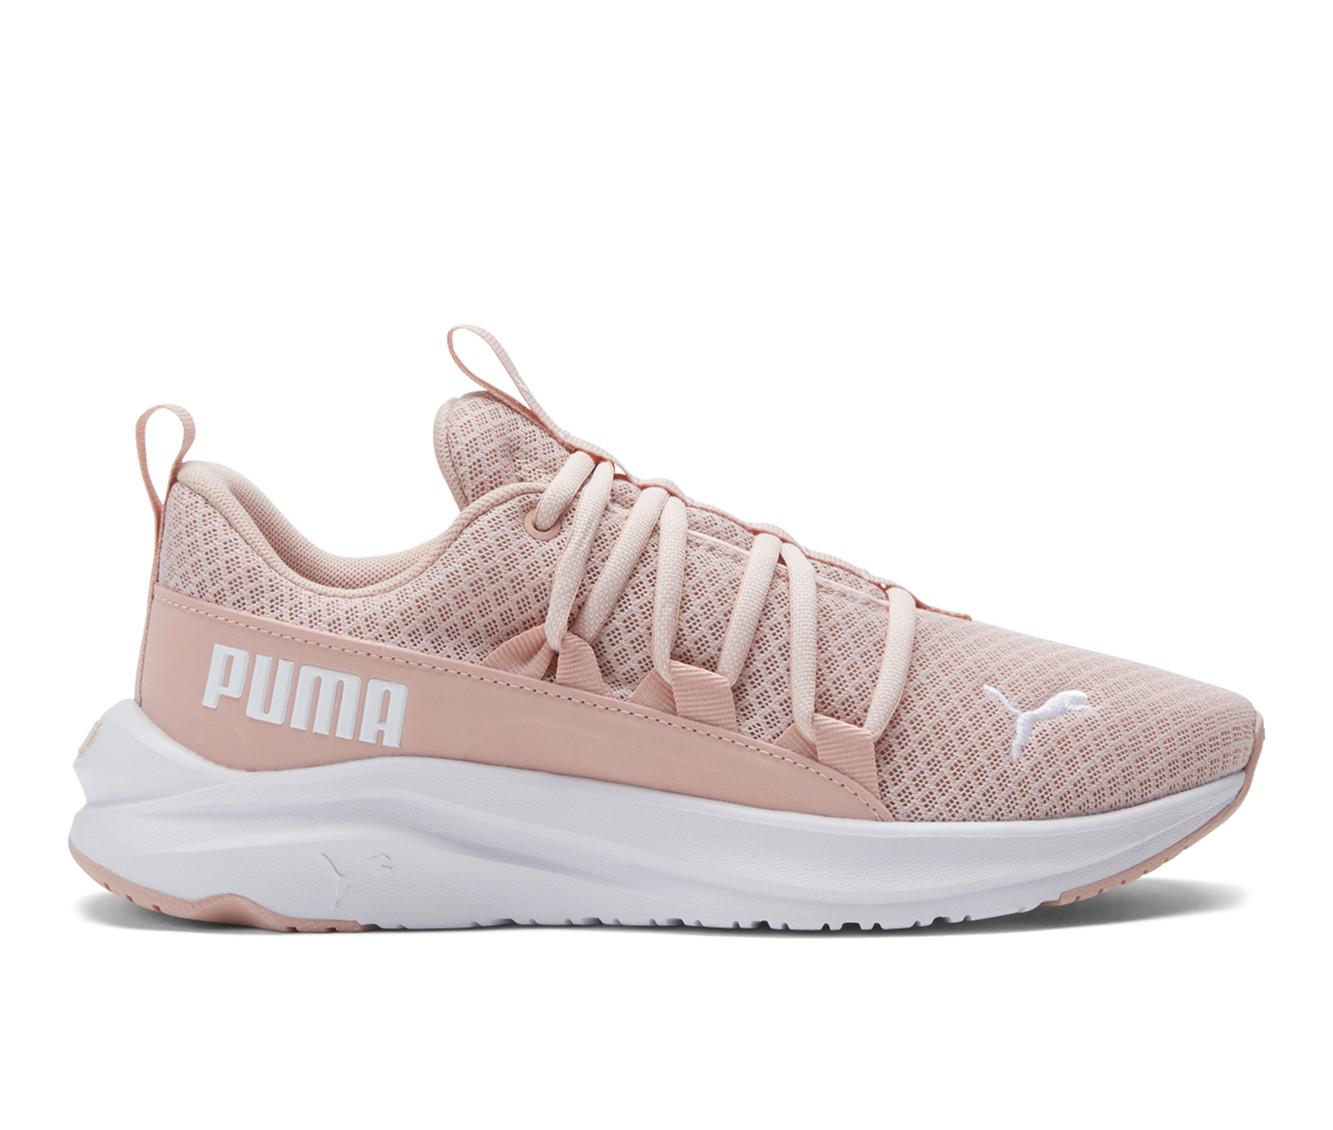 Tegenover Wacht even Smeren Women's Puma Softride One4all Running Shoes | Shoe Carnival